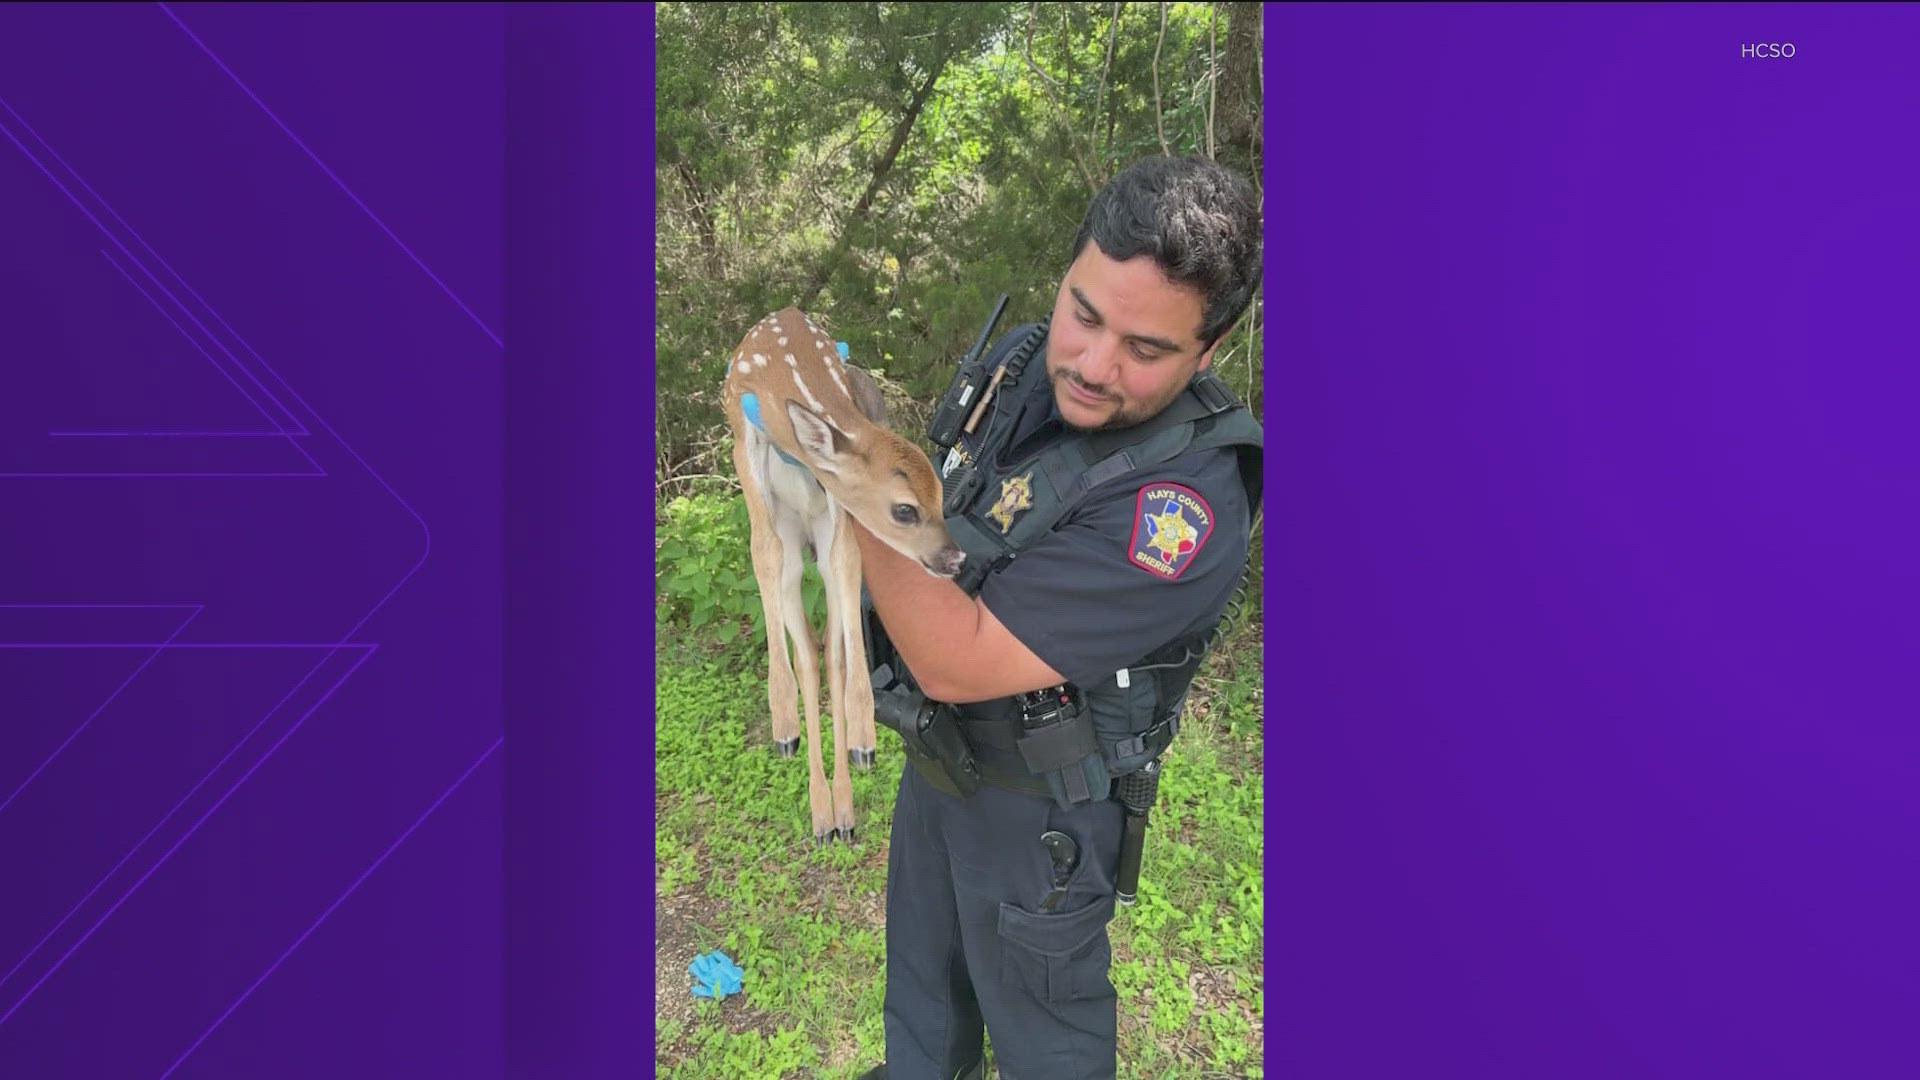 After rescuing the fawn, deputies took it to a wooded area to keep it safe.